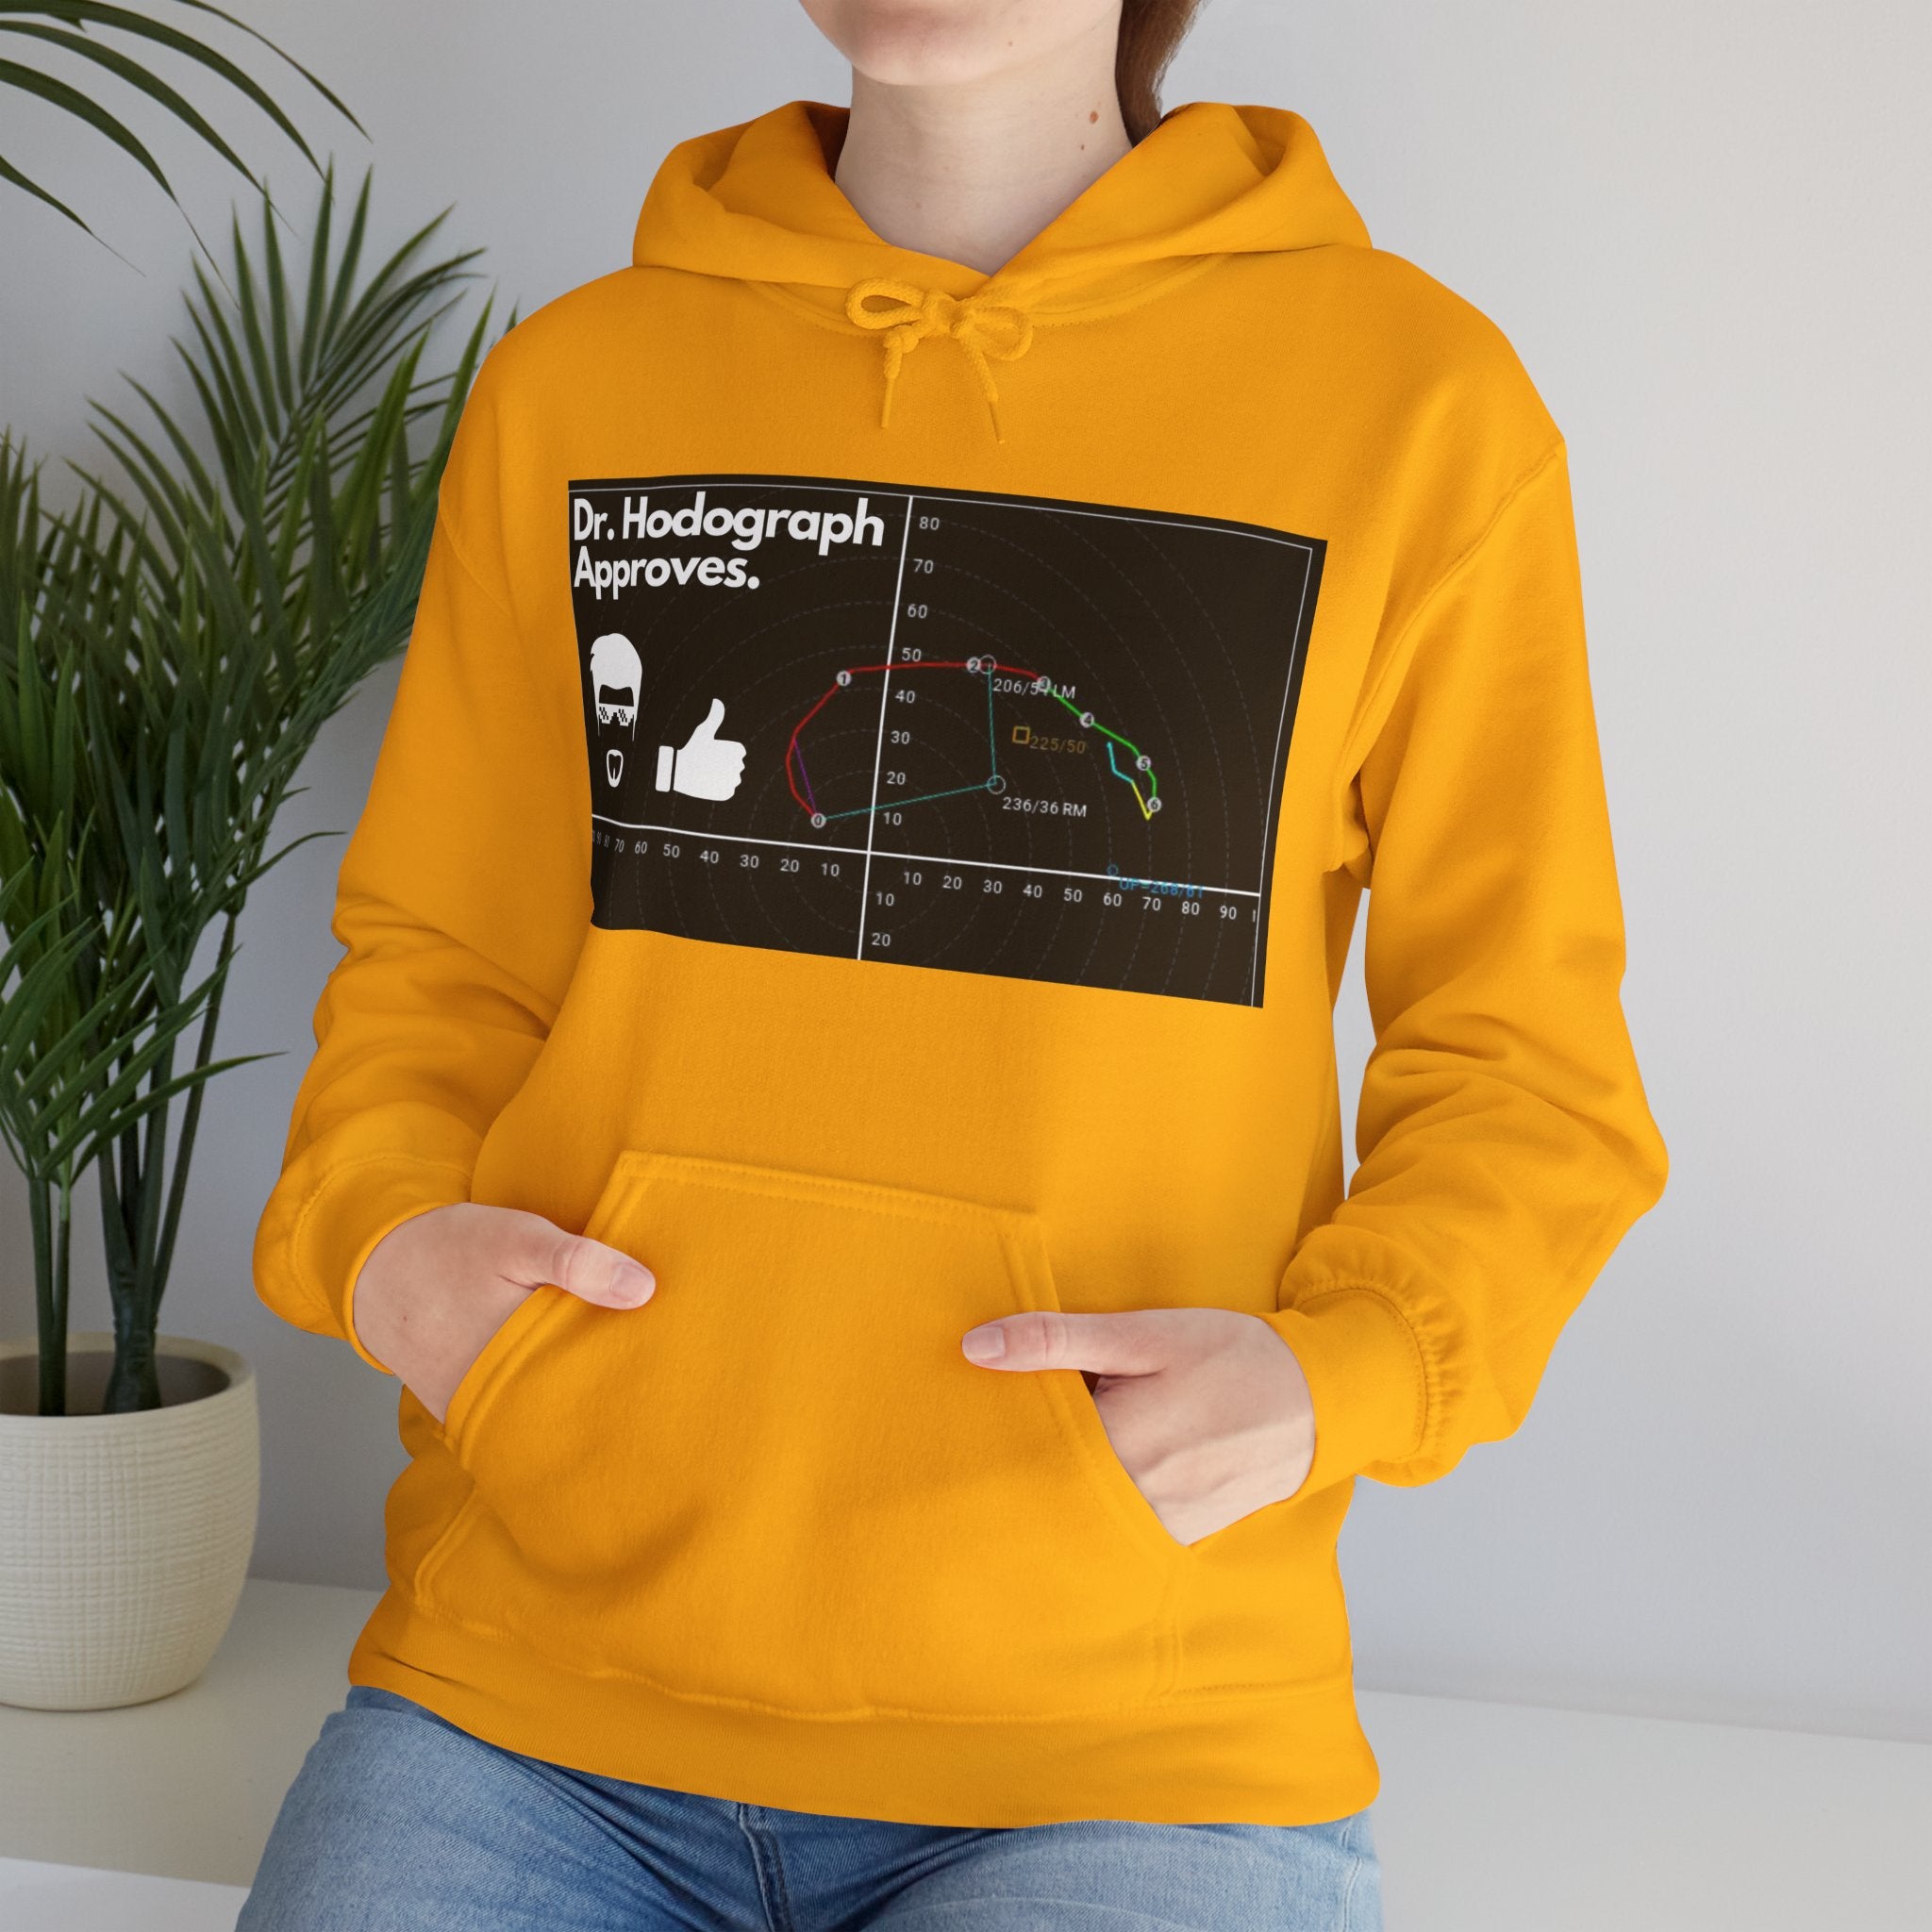 Dr Hodograph Approves Hoodie 